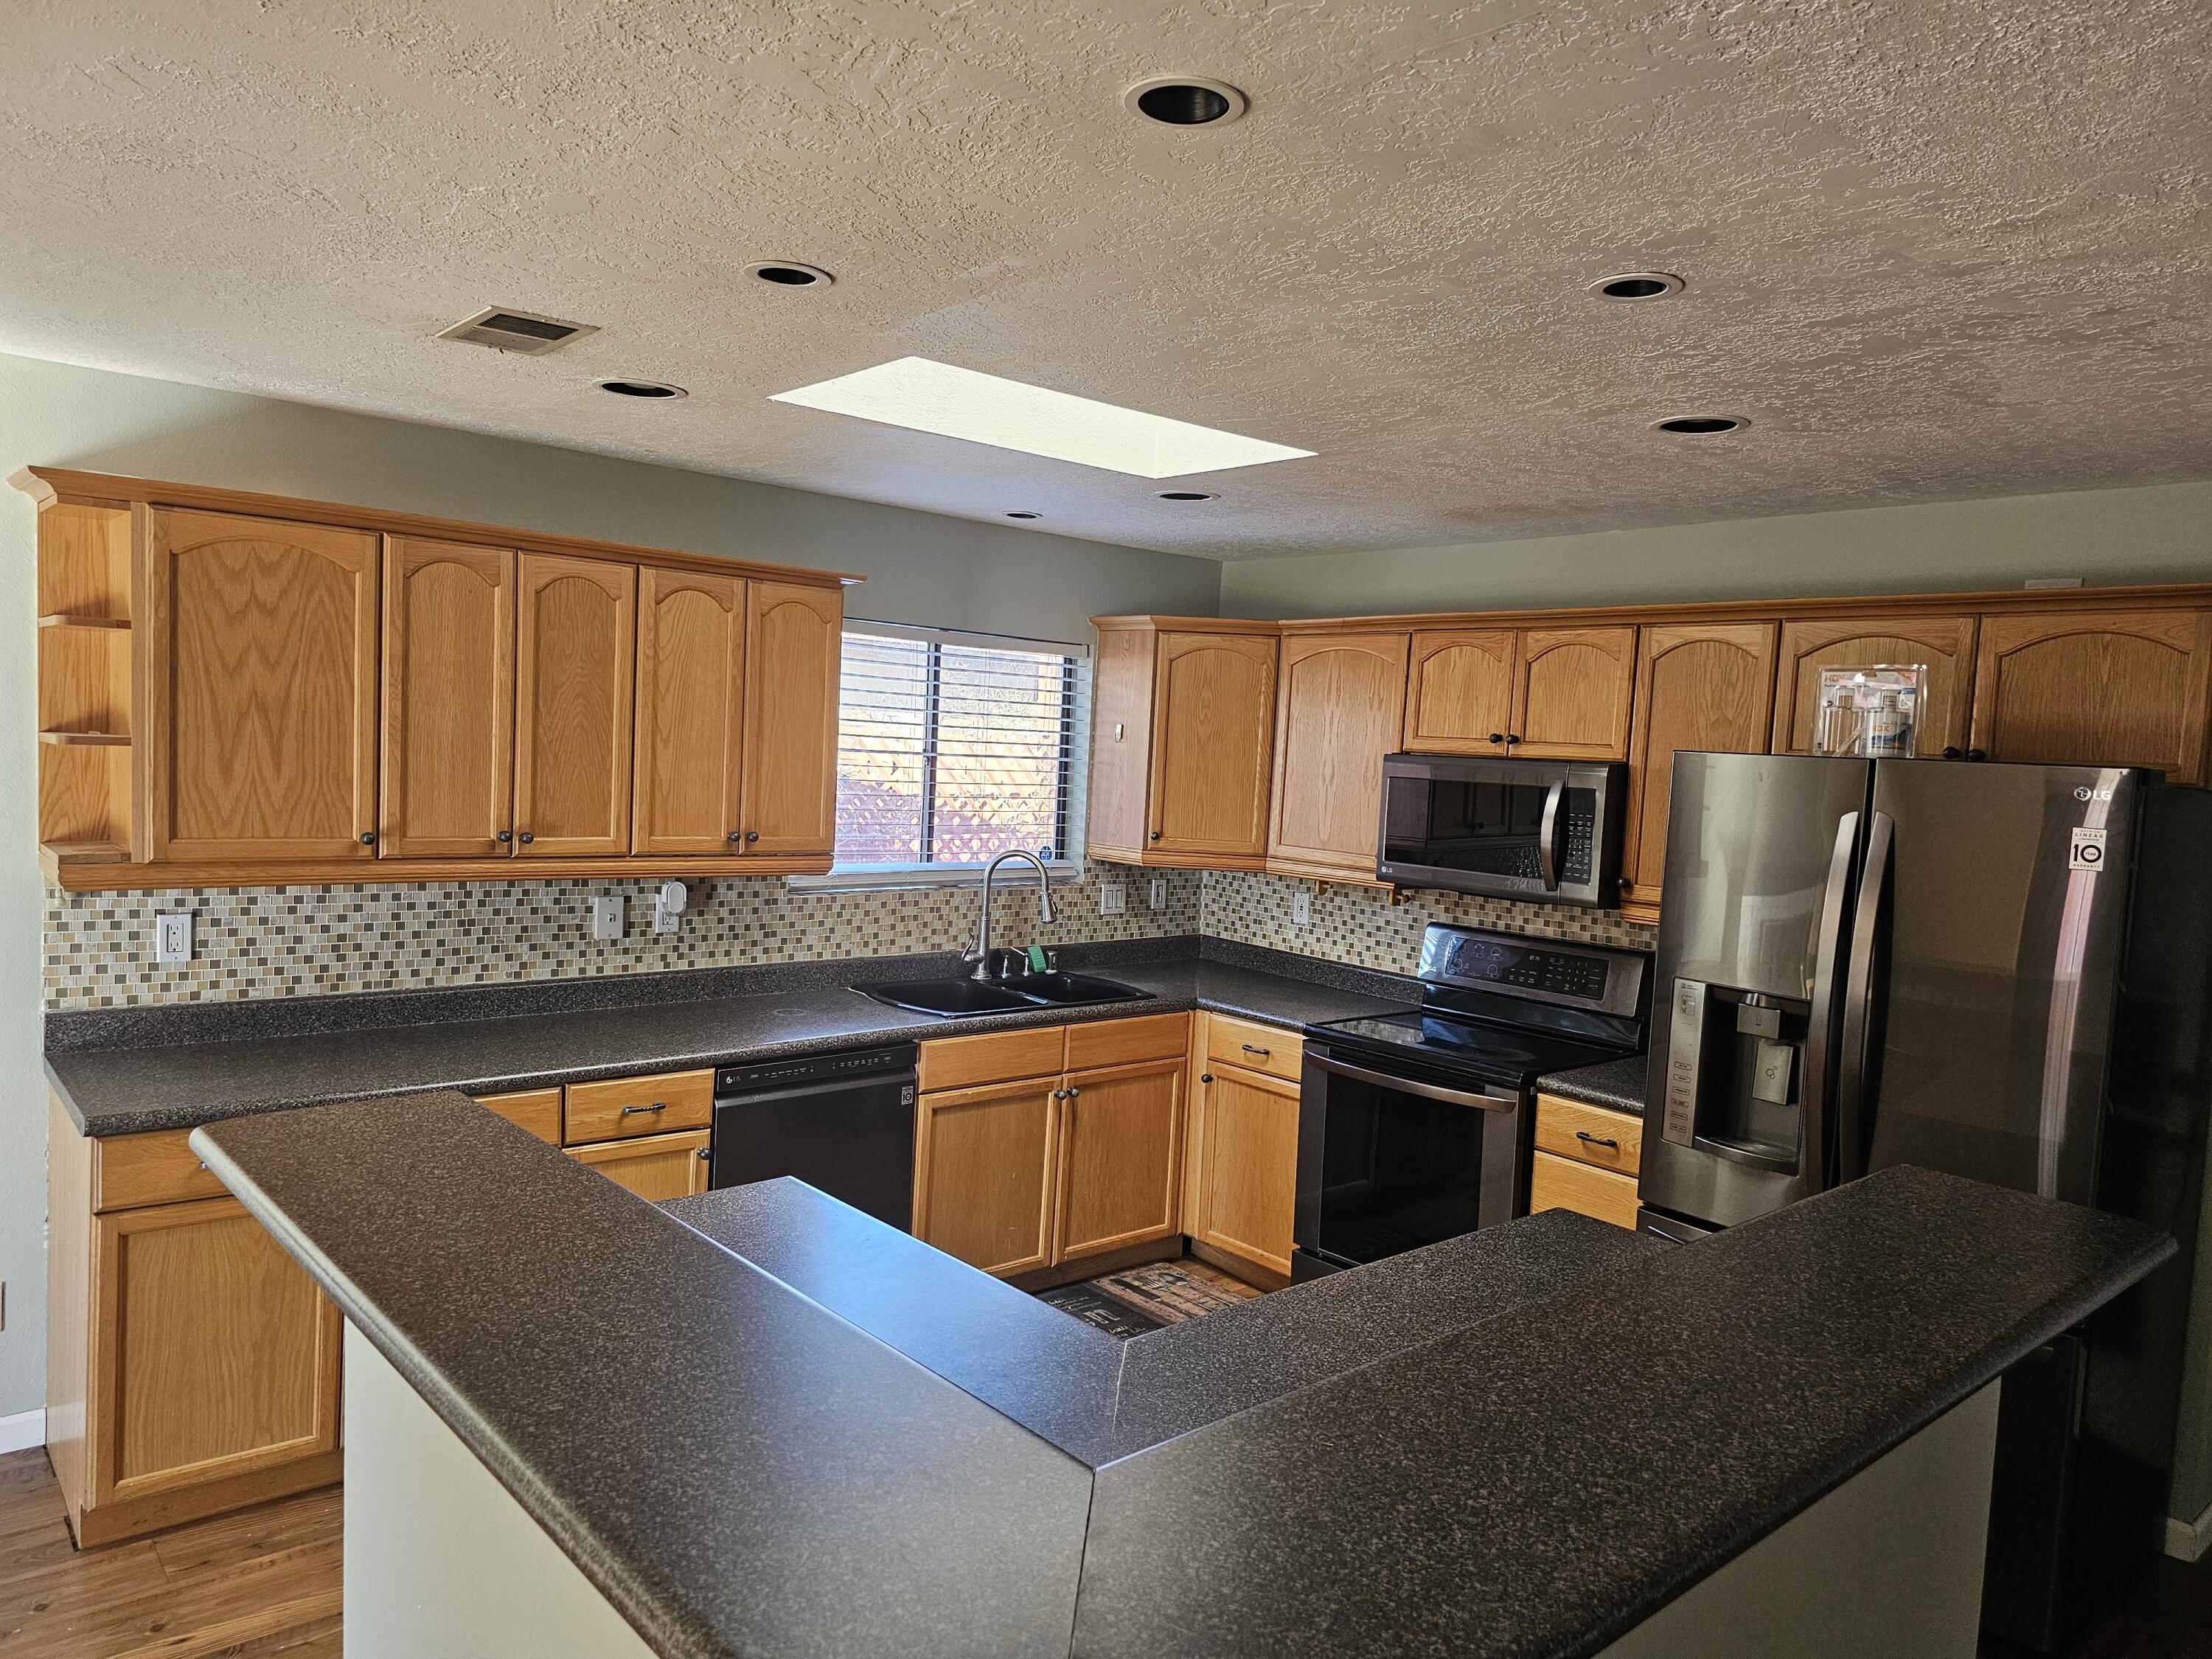 5212 Territorial Road NW, Albuquerque, New Mexico 87120, 3 Bedrooms Bedrooms, ,2 BathroomsBathrooms,Residential,For Sale,5212 Territorial Road NW,1042233